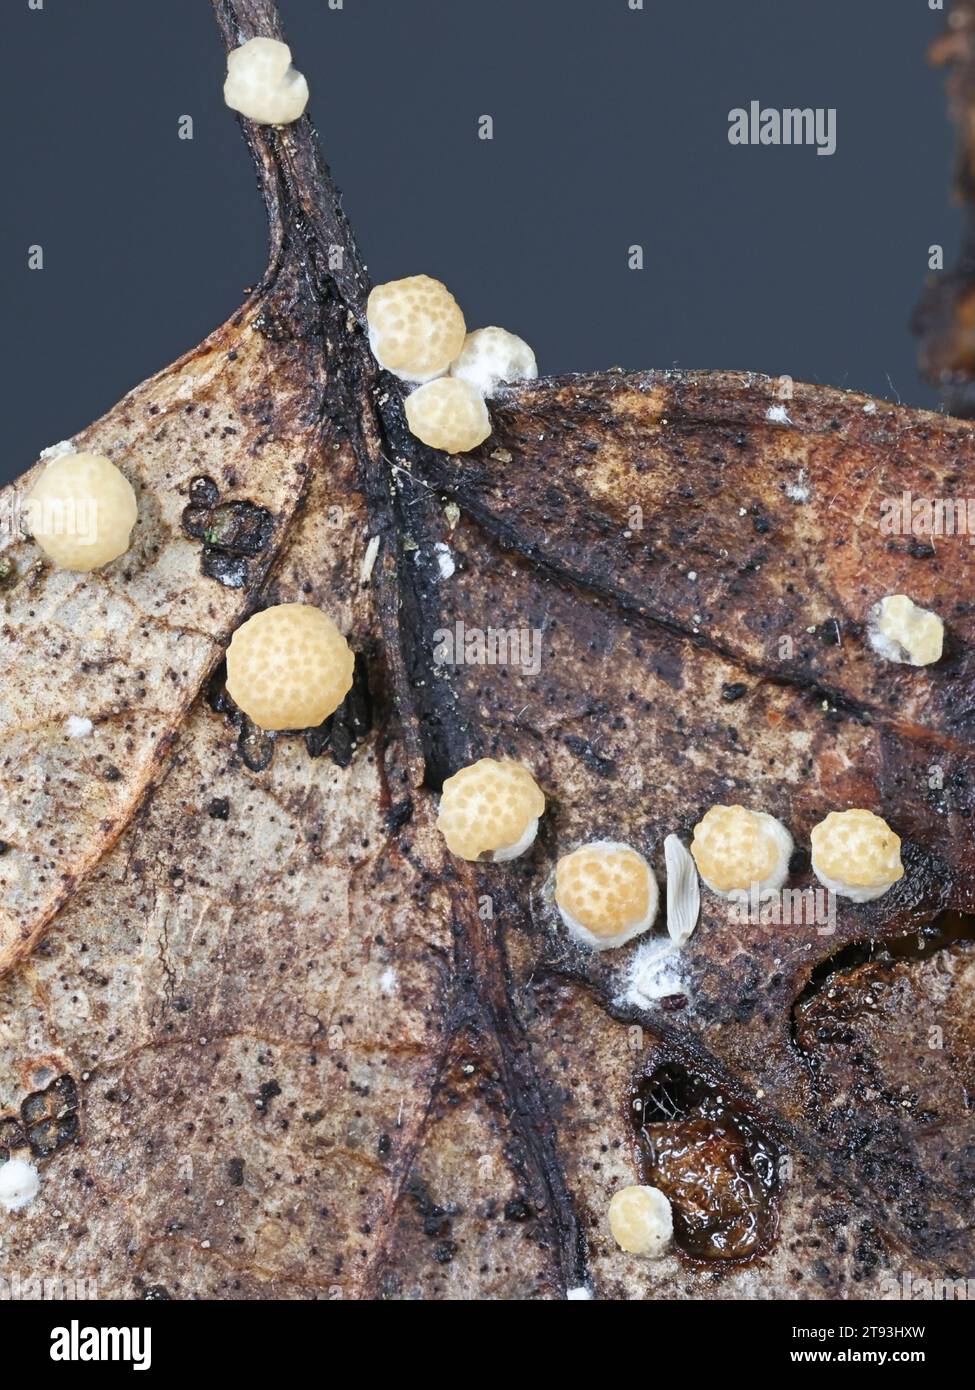 Trichoderma foliicola, also called Hypocrea foliicola, anamorphic fungus from Finland growing on leaf litter, no common English name Stock Photo